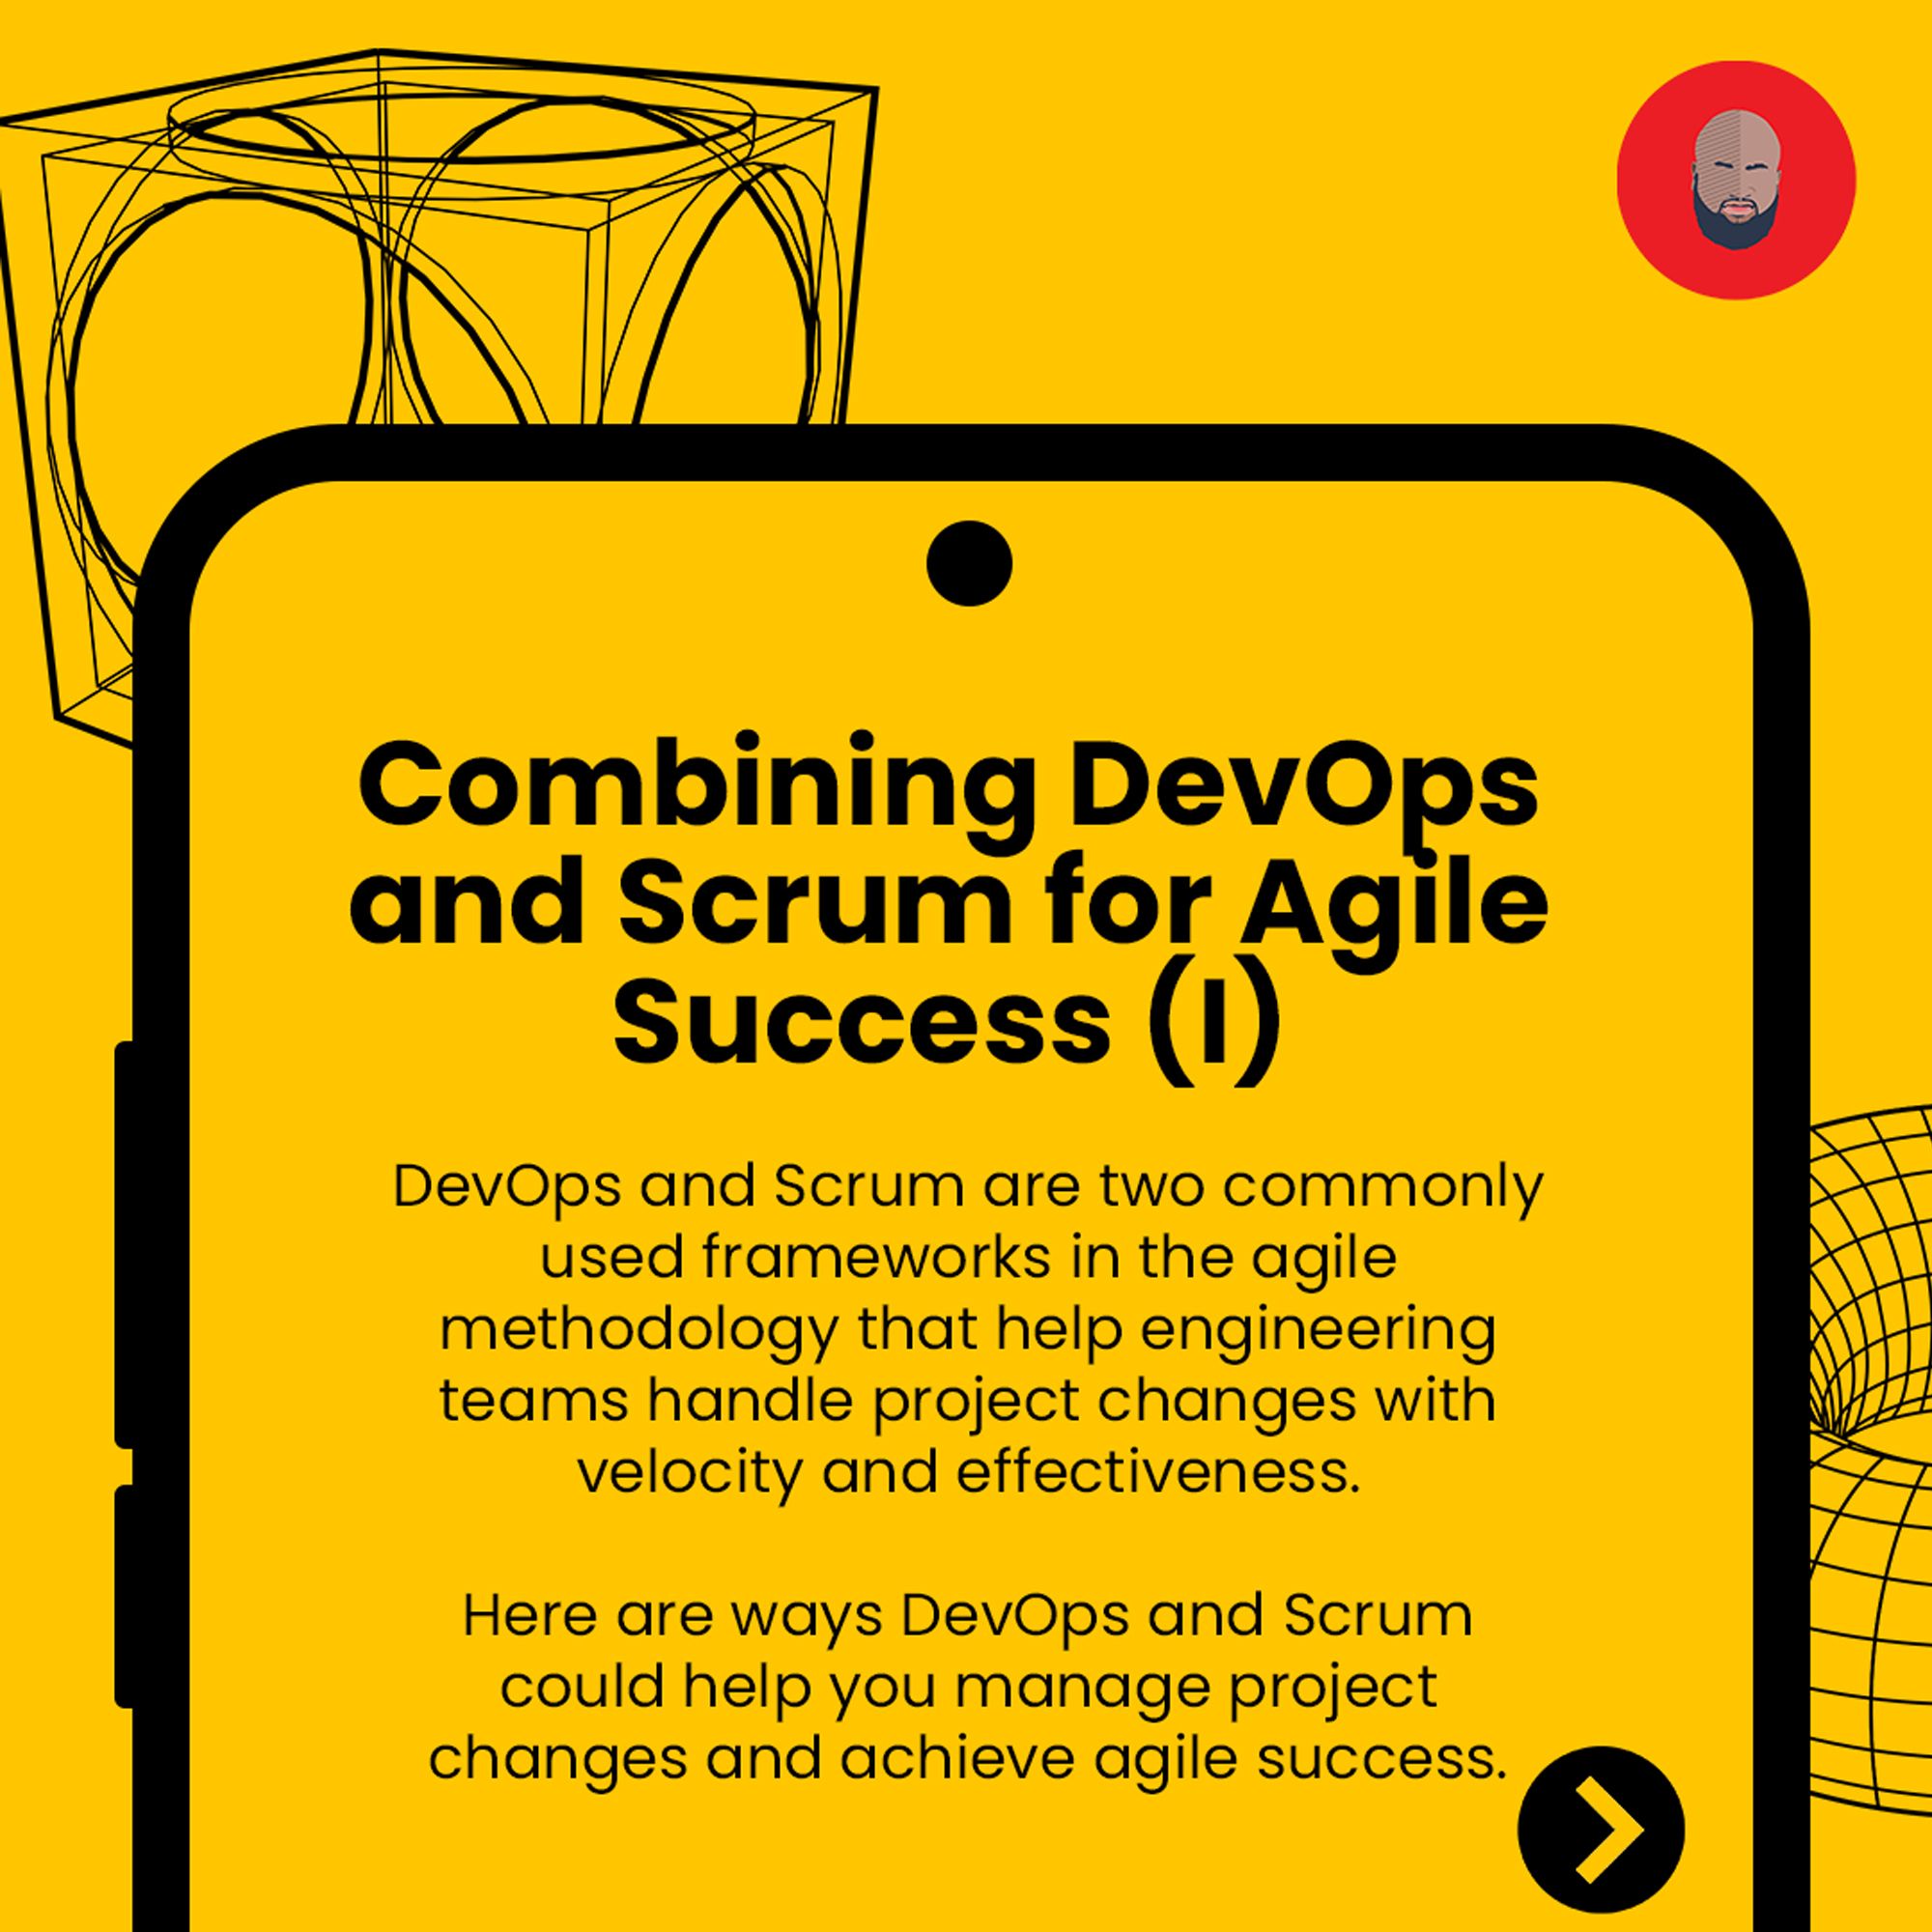 Combining DevOps and Scrum for Agile Success